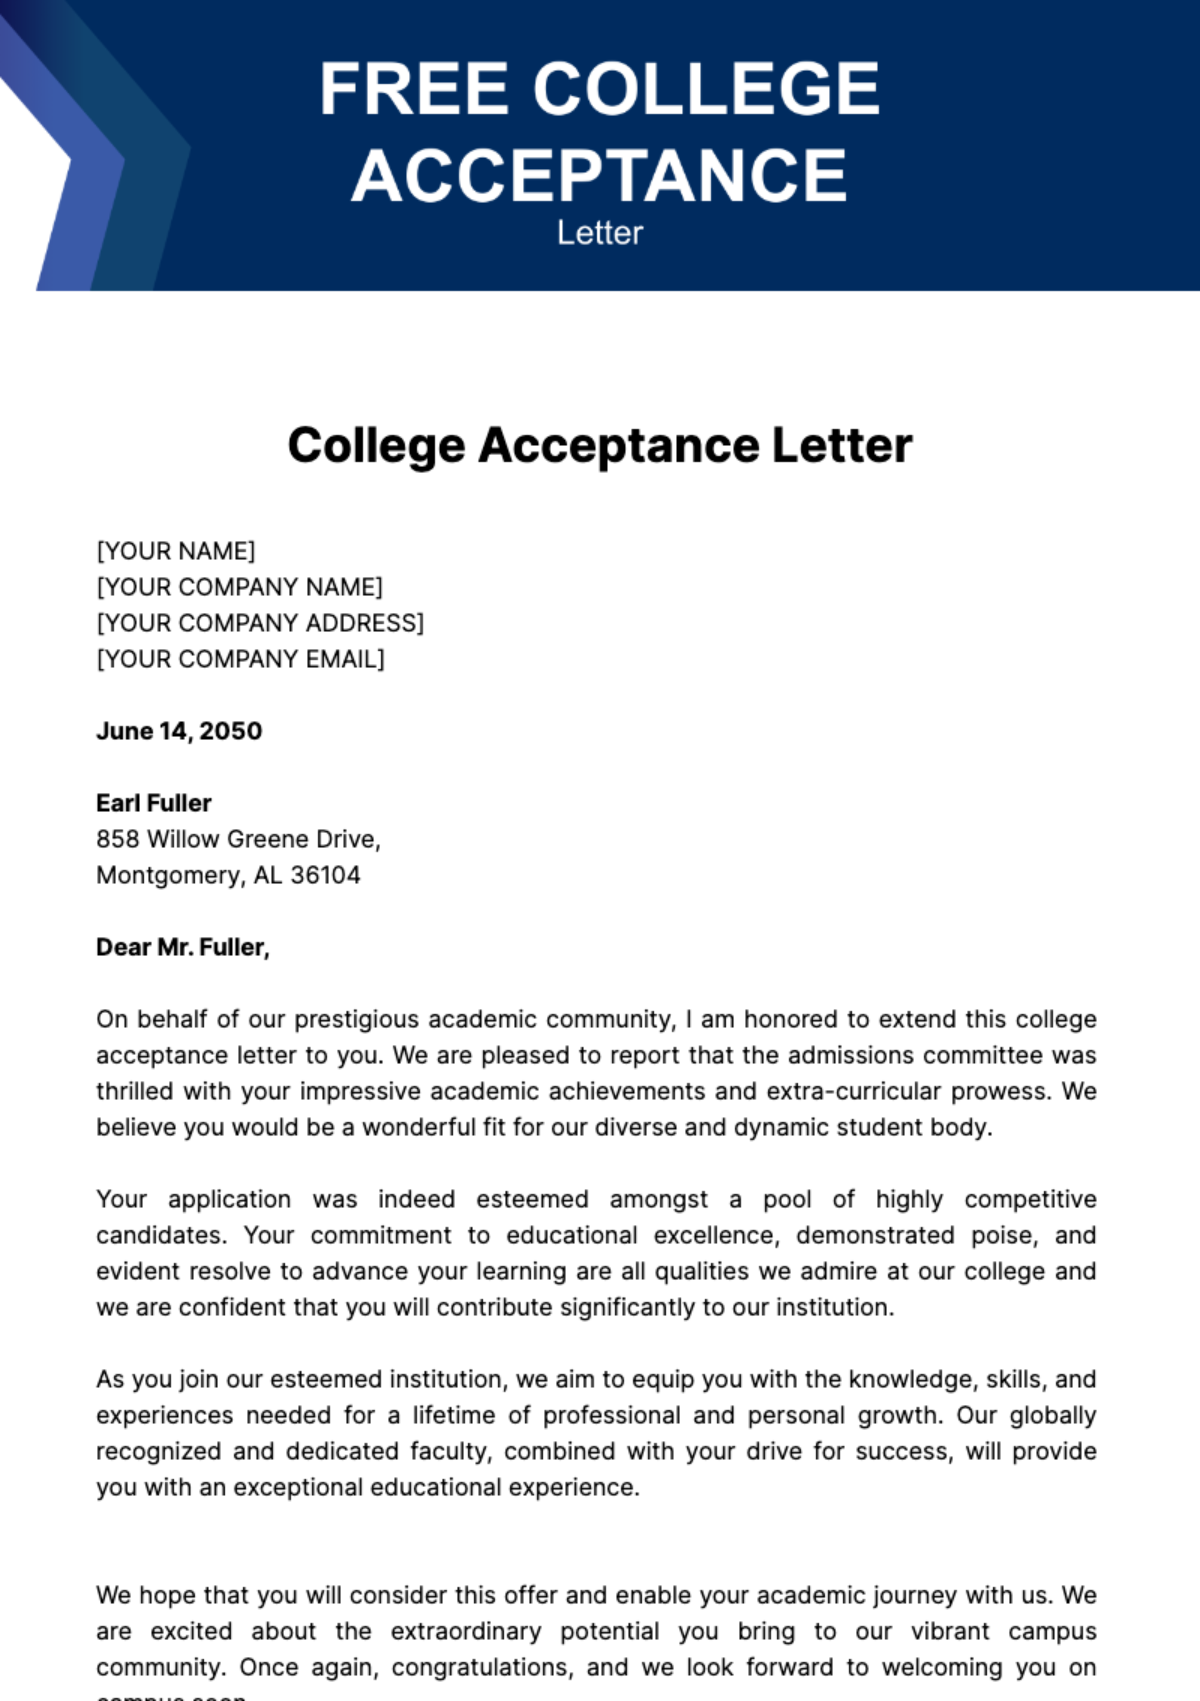 Free College Acceptance Letter template